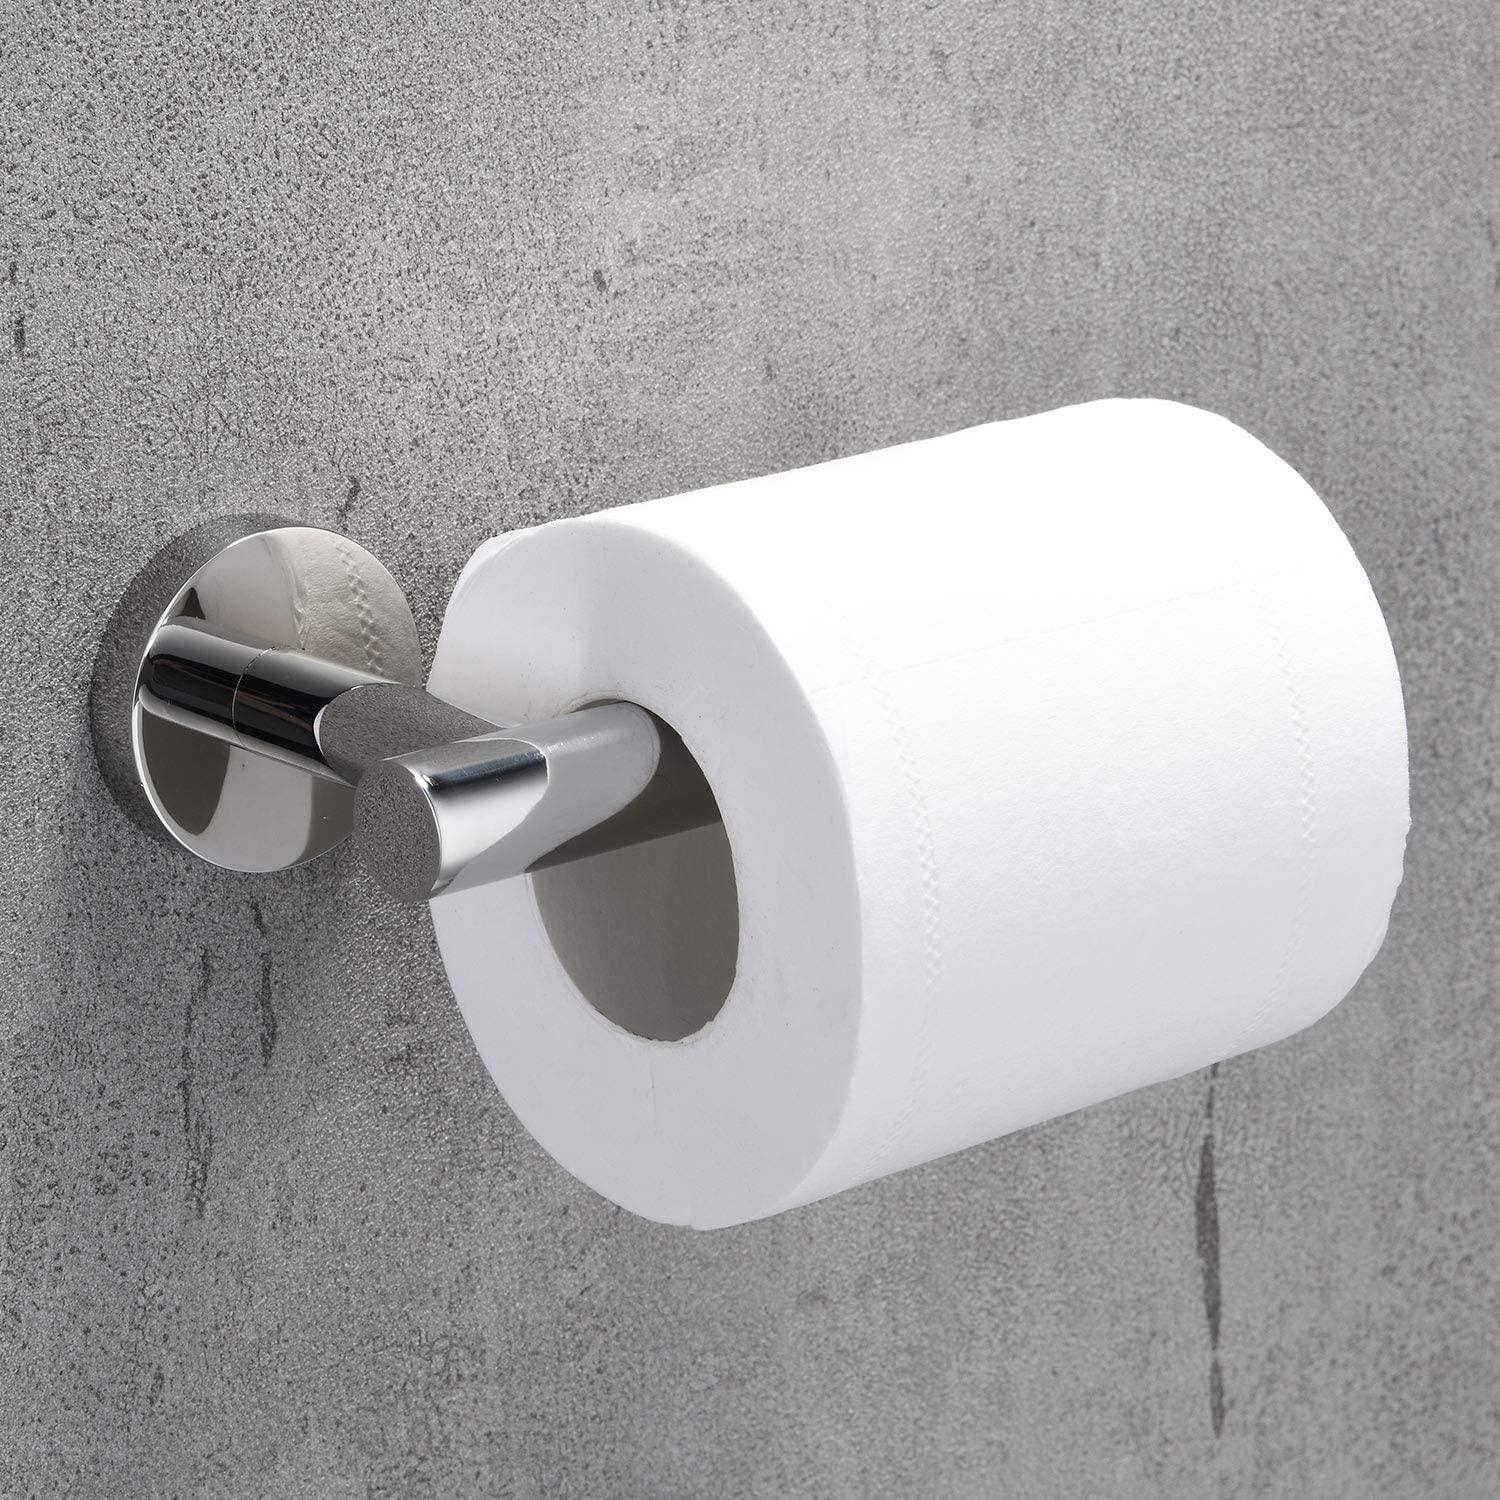 ANYPOWK, Toilet Paper Holder Wall Mount - 5.2 inch 304 Stainless Steel Toilet Roll Holder for Bathroom - Silver